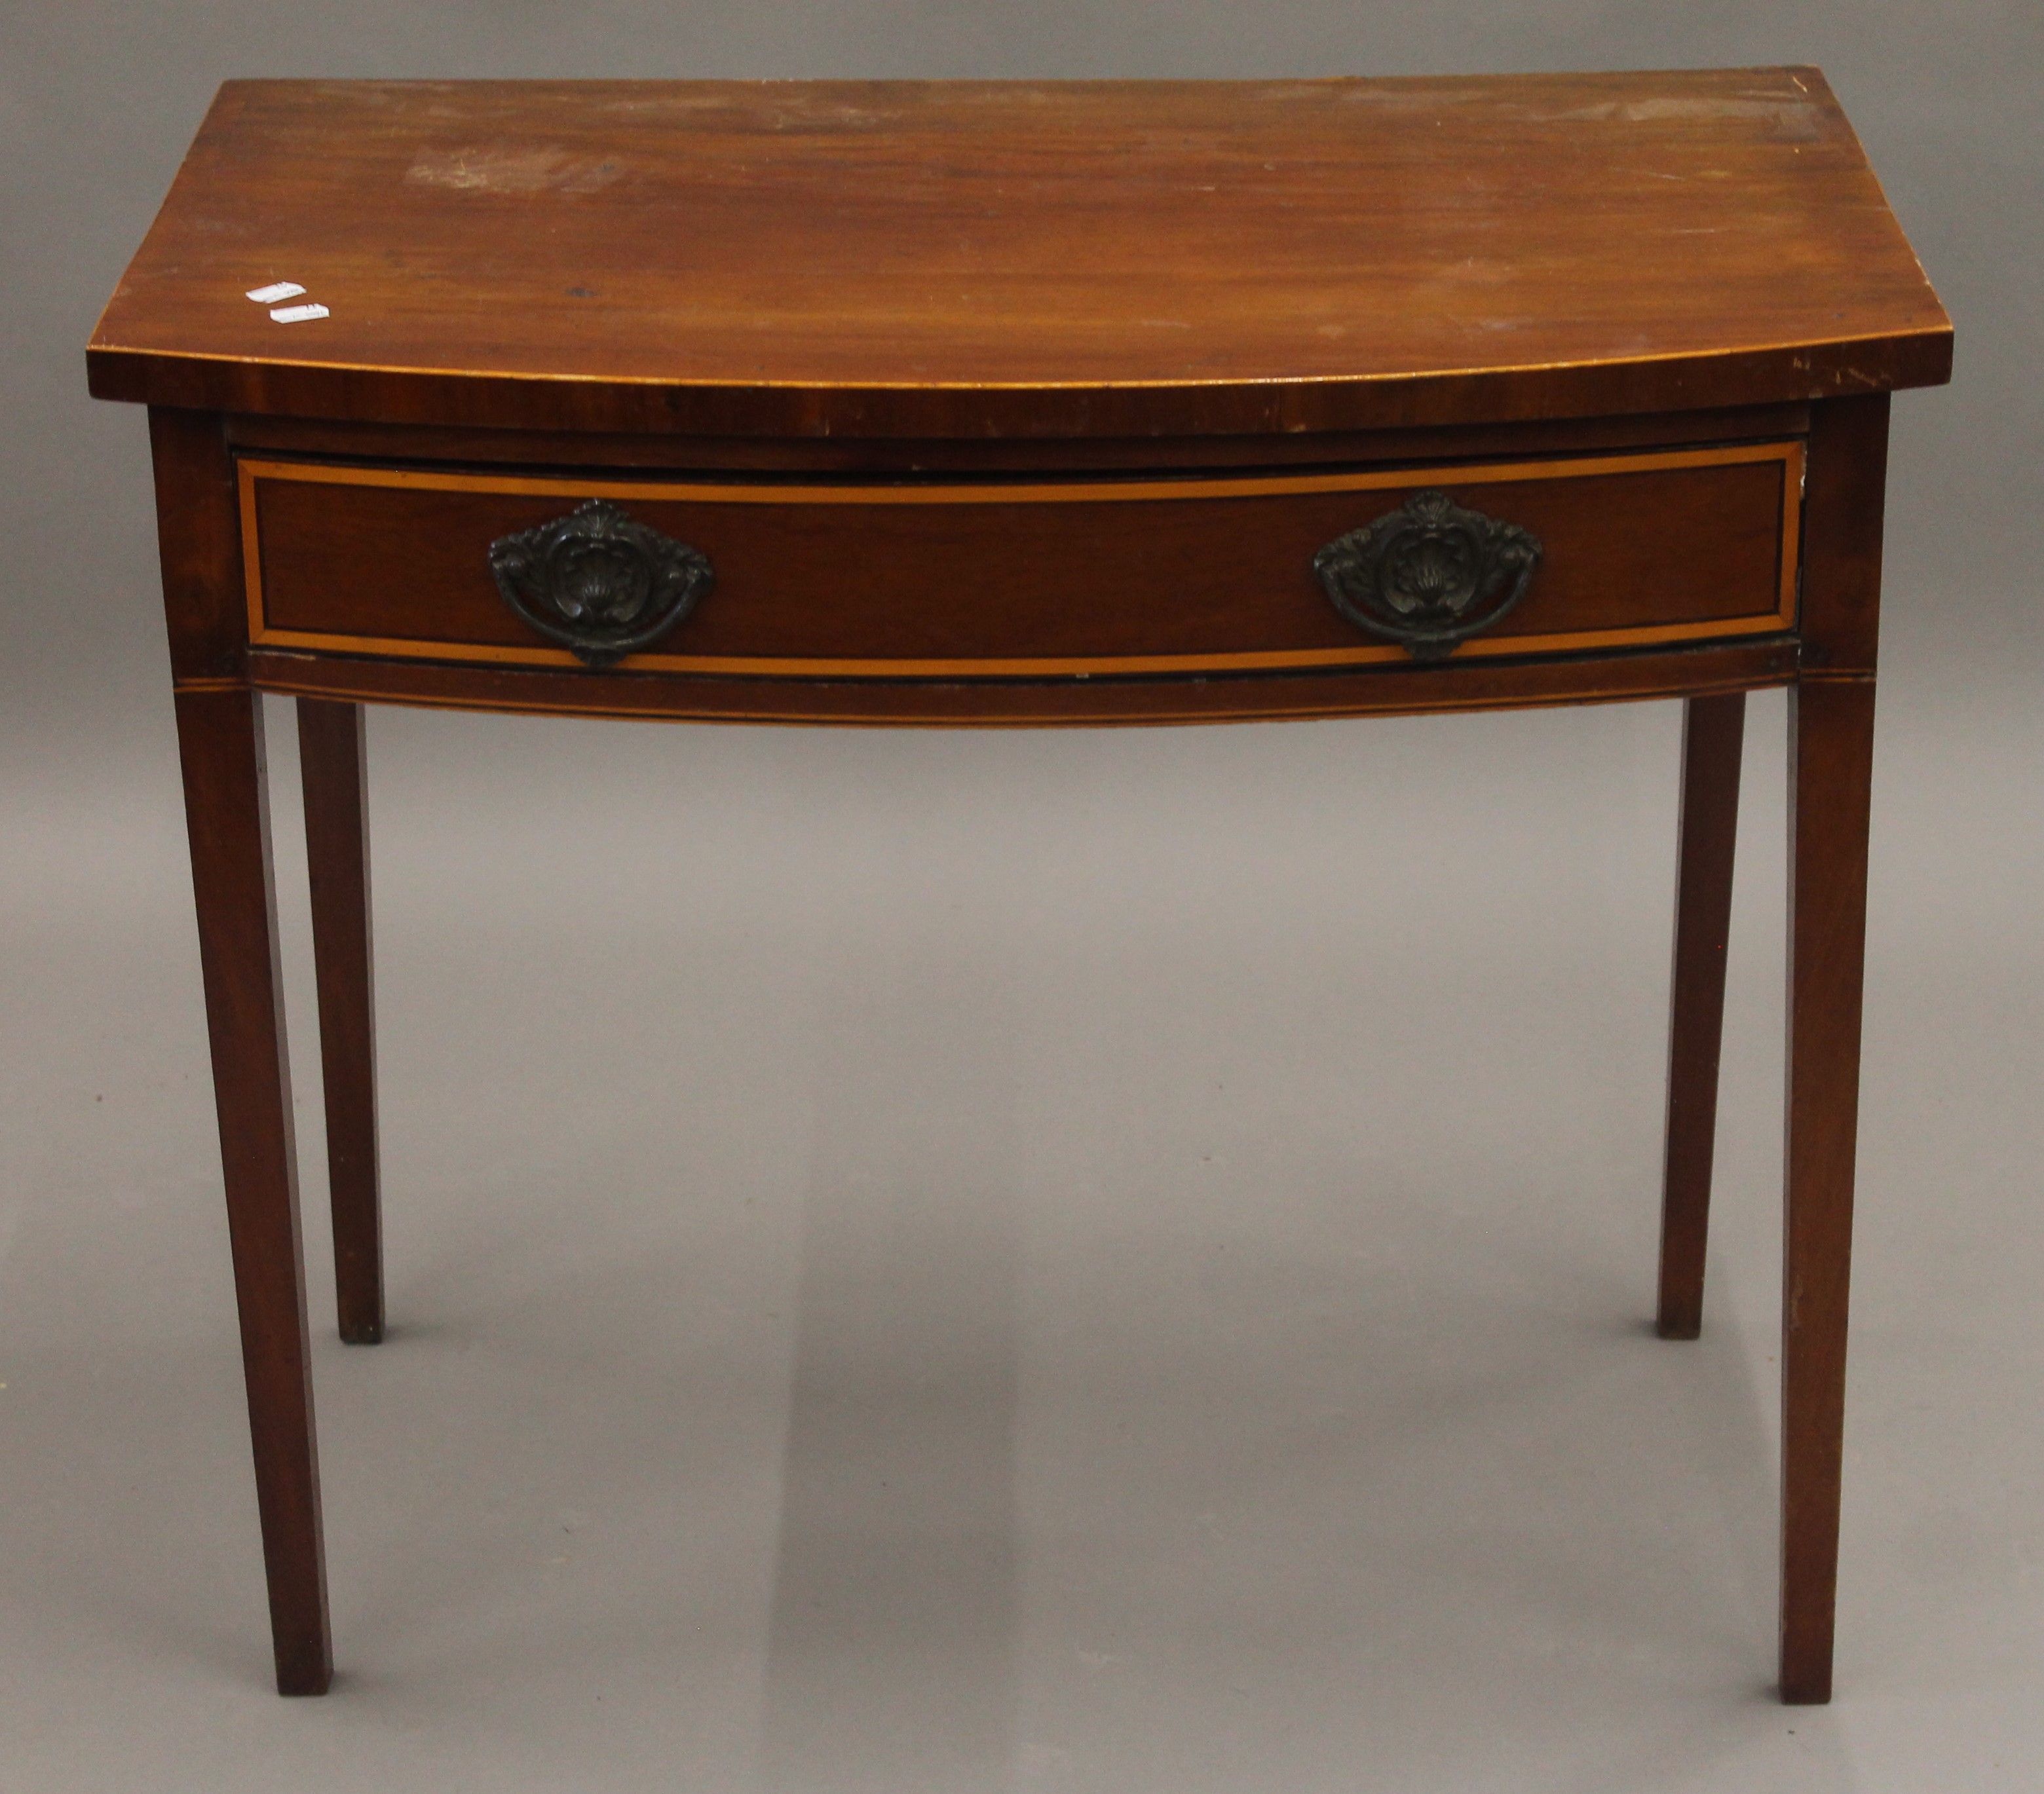 A 19th century mahogany bowfront single drawer side table. 81.5 cm wide.